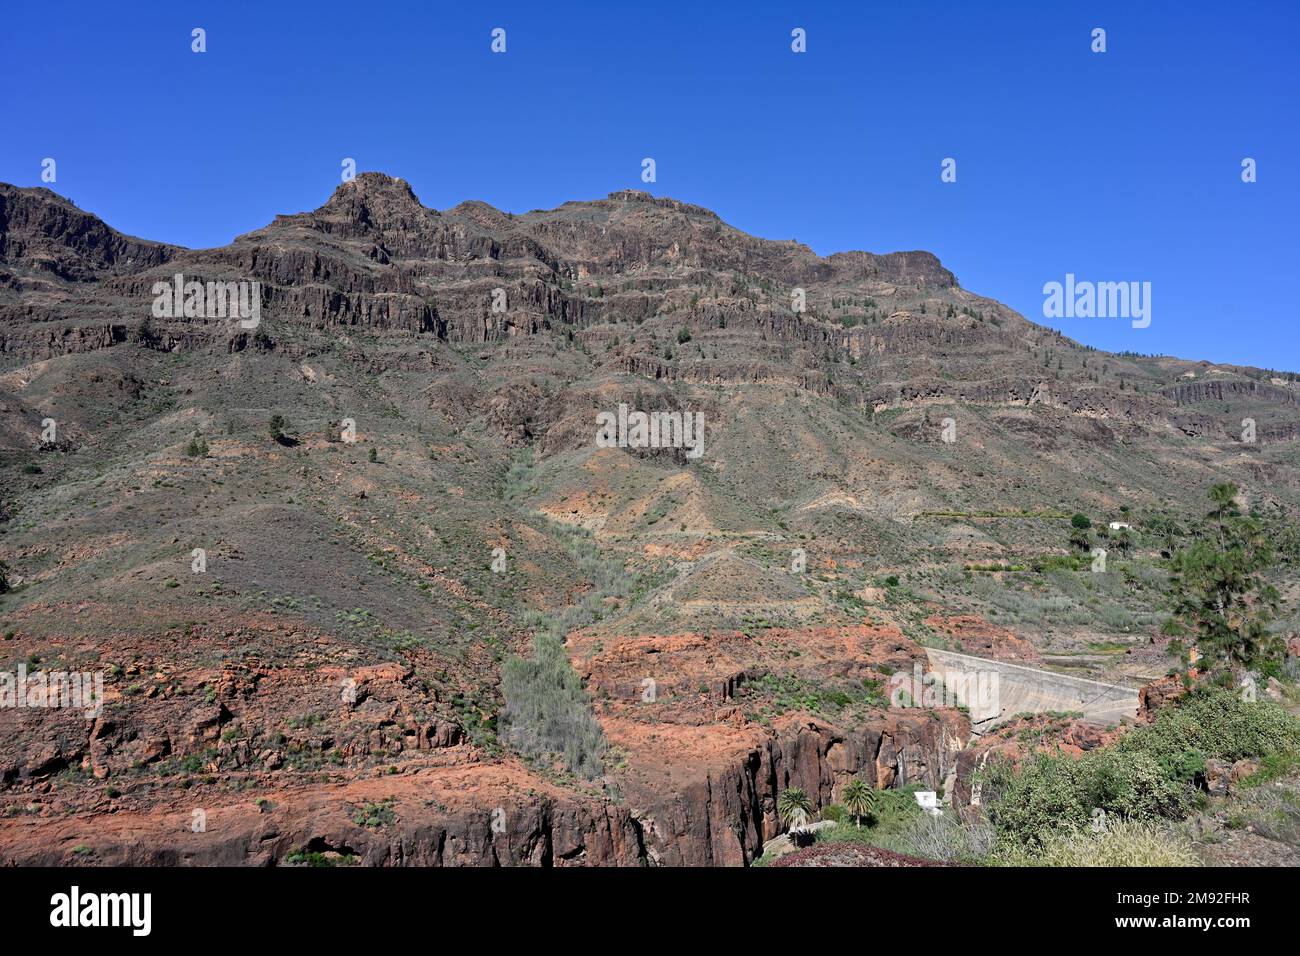 Looking up the gorge and valley of Barranco de Fataga with the small dry reservoir “Embalse de Fataga”, Gran Canaria Stock Photo